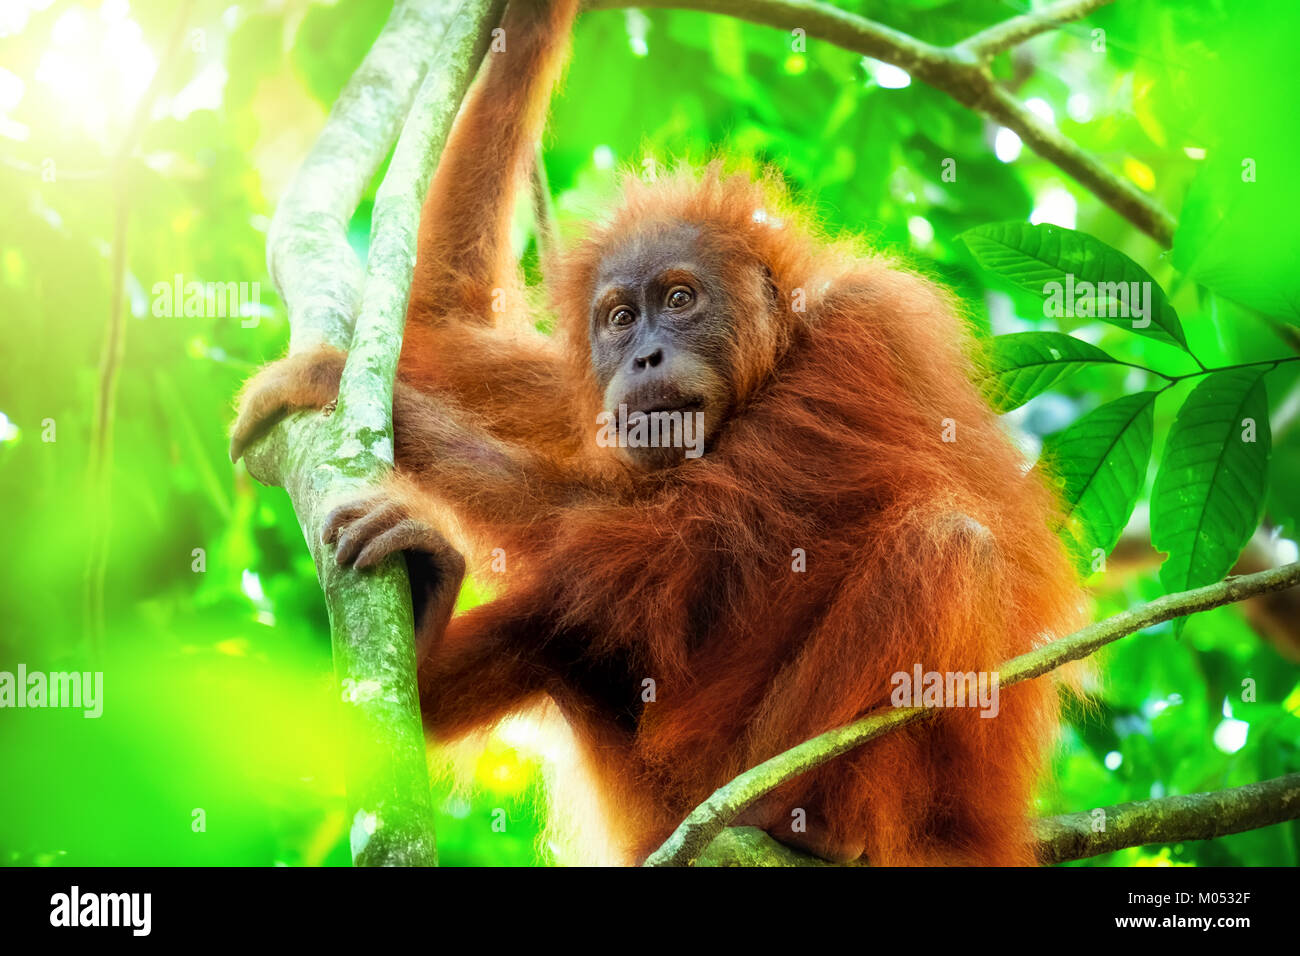 Cute baby orangutan hanging on branch and looking around against thick green foliage and shining sun on background. Little ape resting on tree in exot Stock Photo